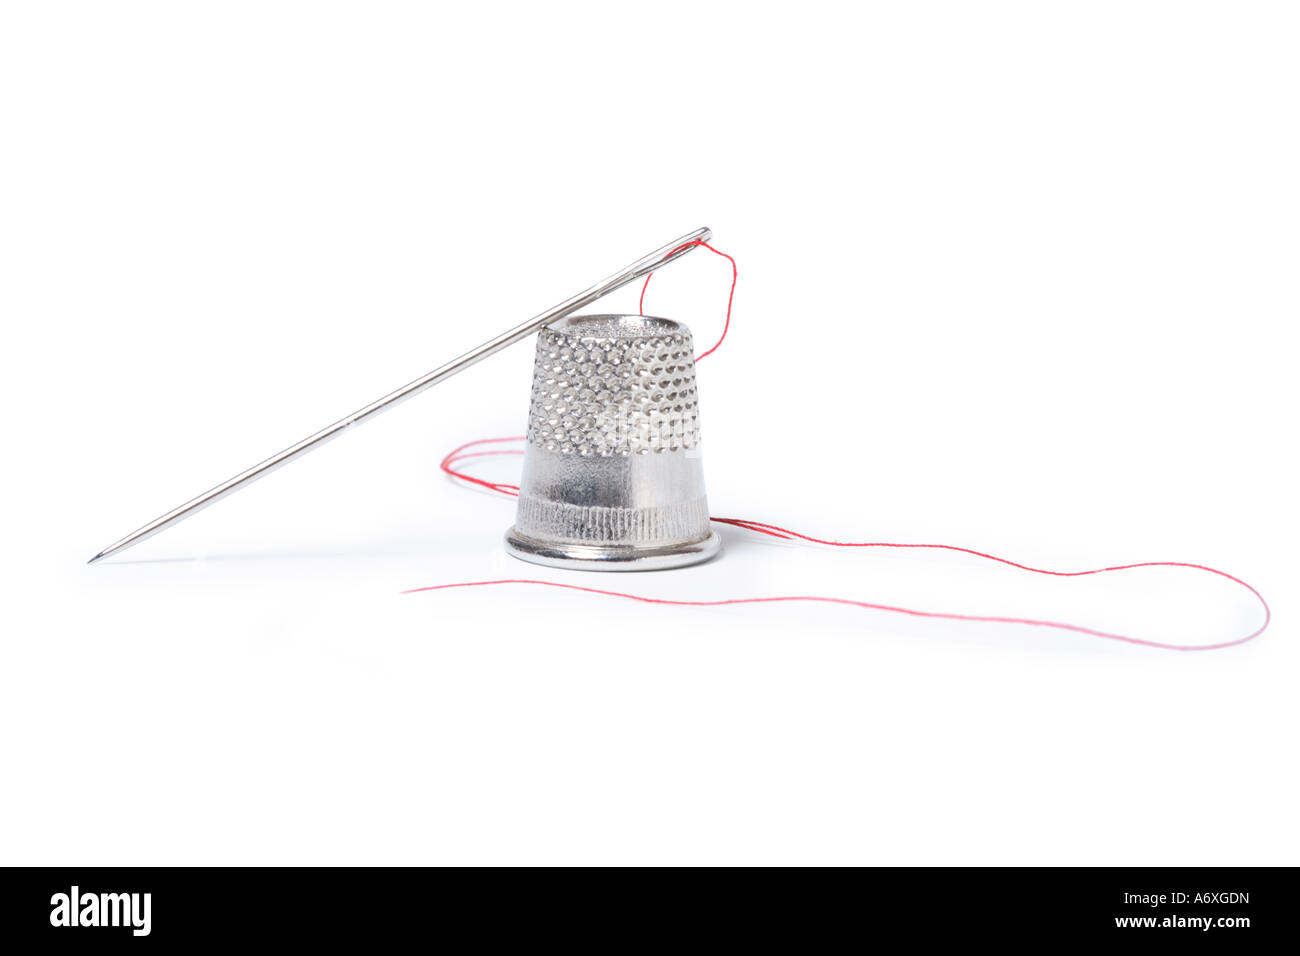 Thimble, needle and thread cut out on white background Stock Photo